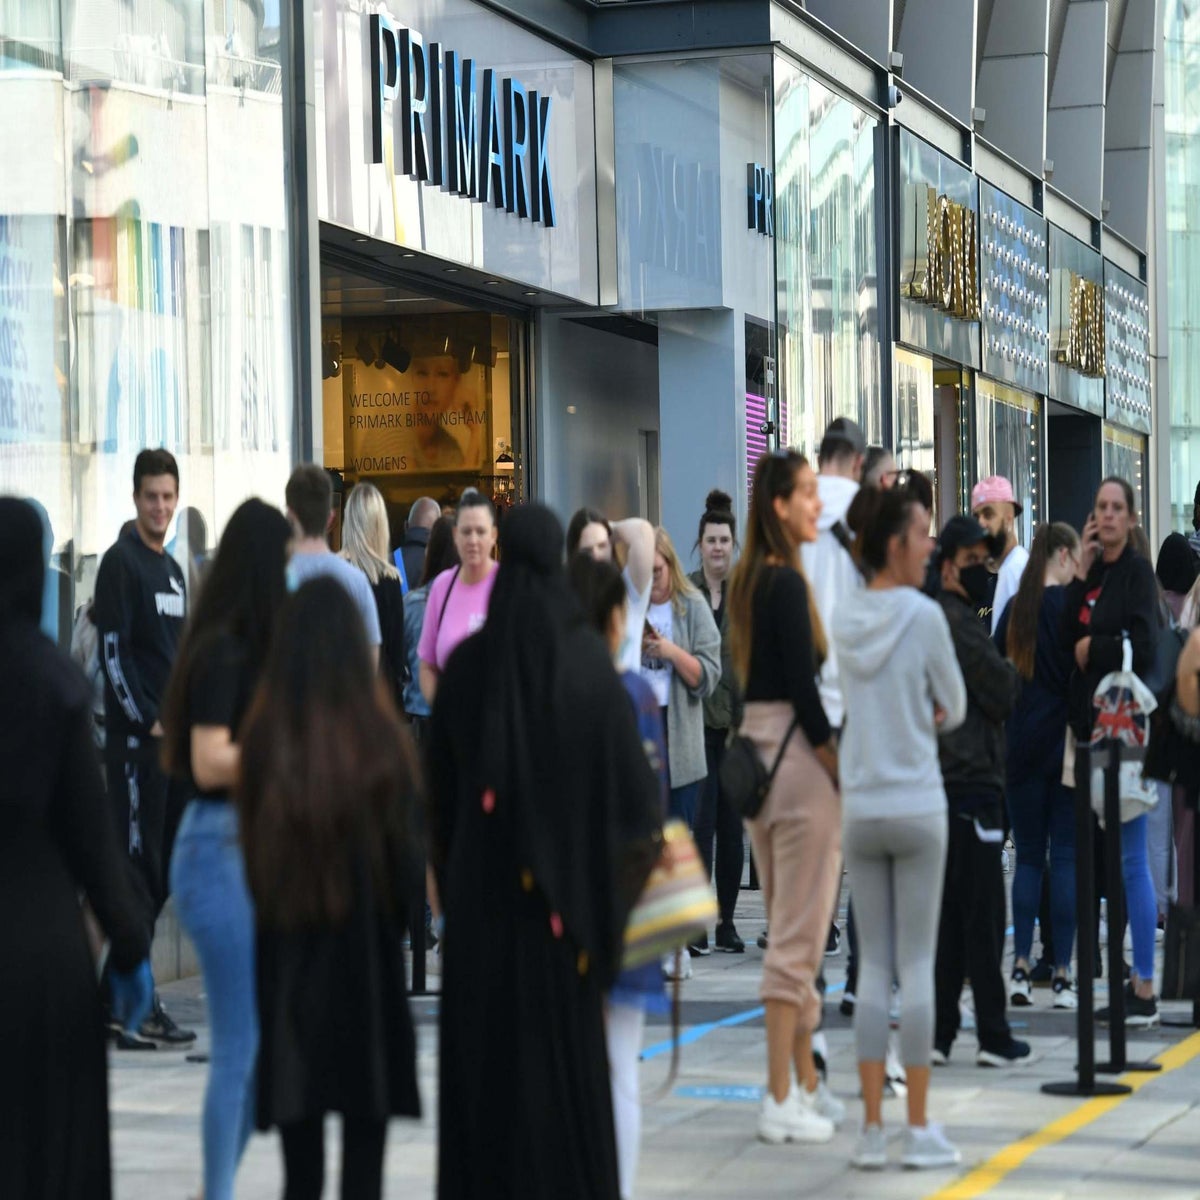 Queues for Primark stretches length of Westfield London on